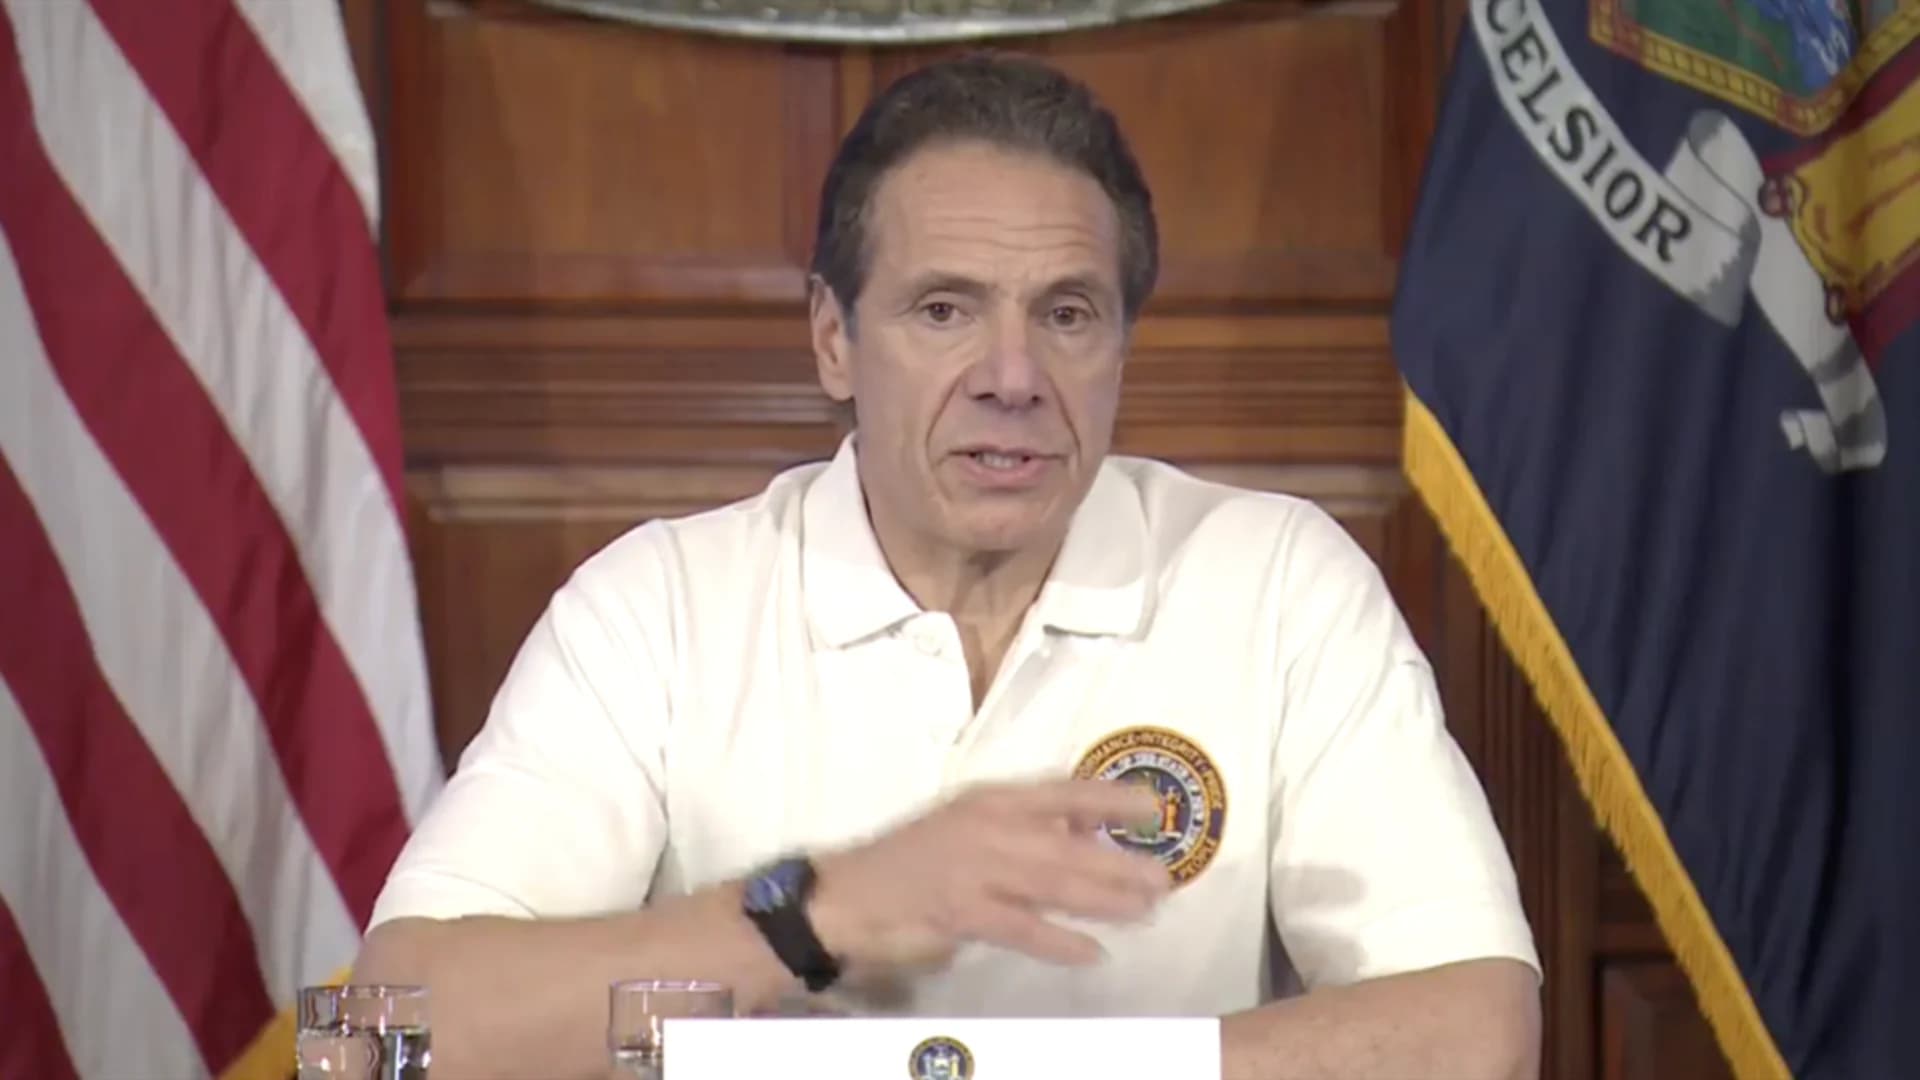 Gov. Cuomo: Numbers top 10,000, officials scouting field hospital locations